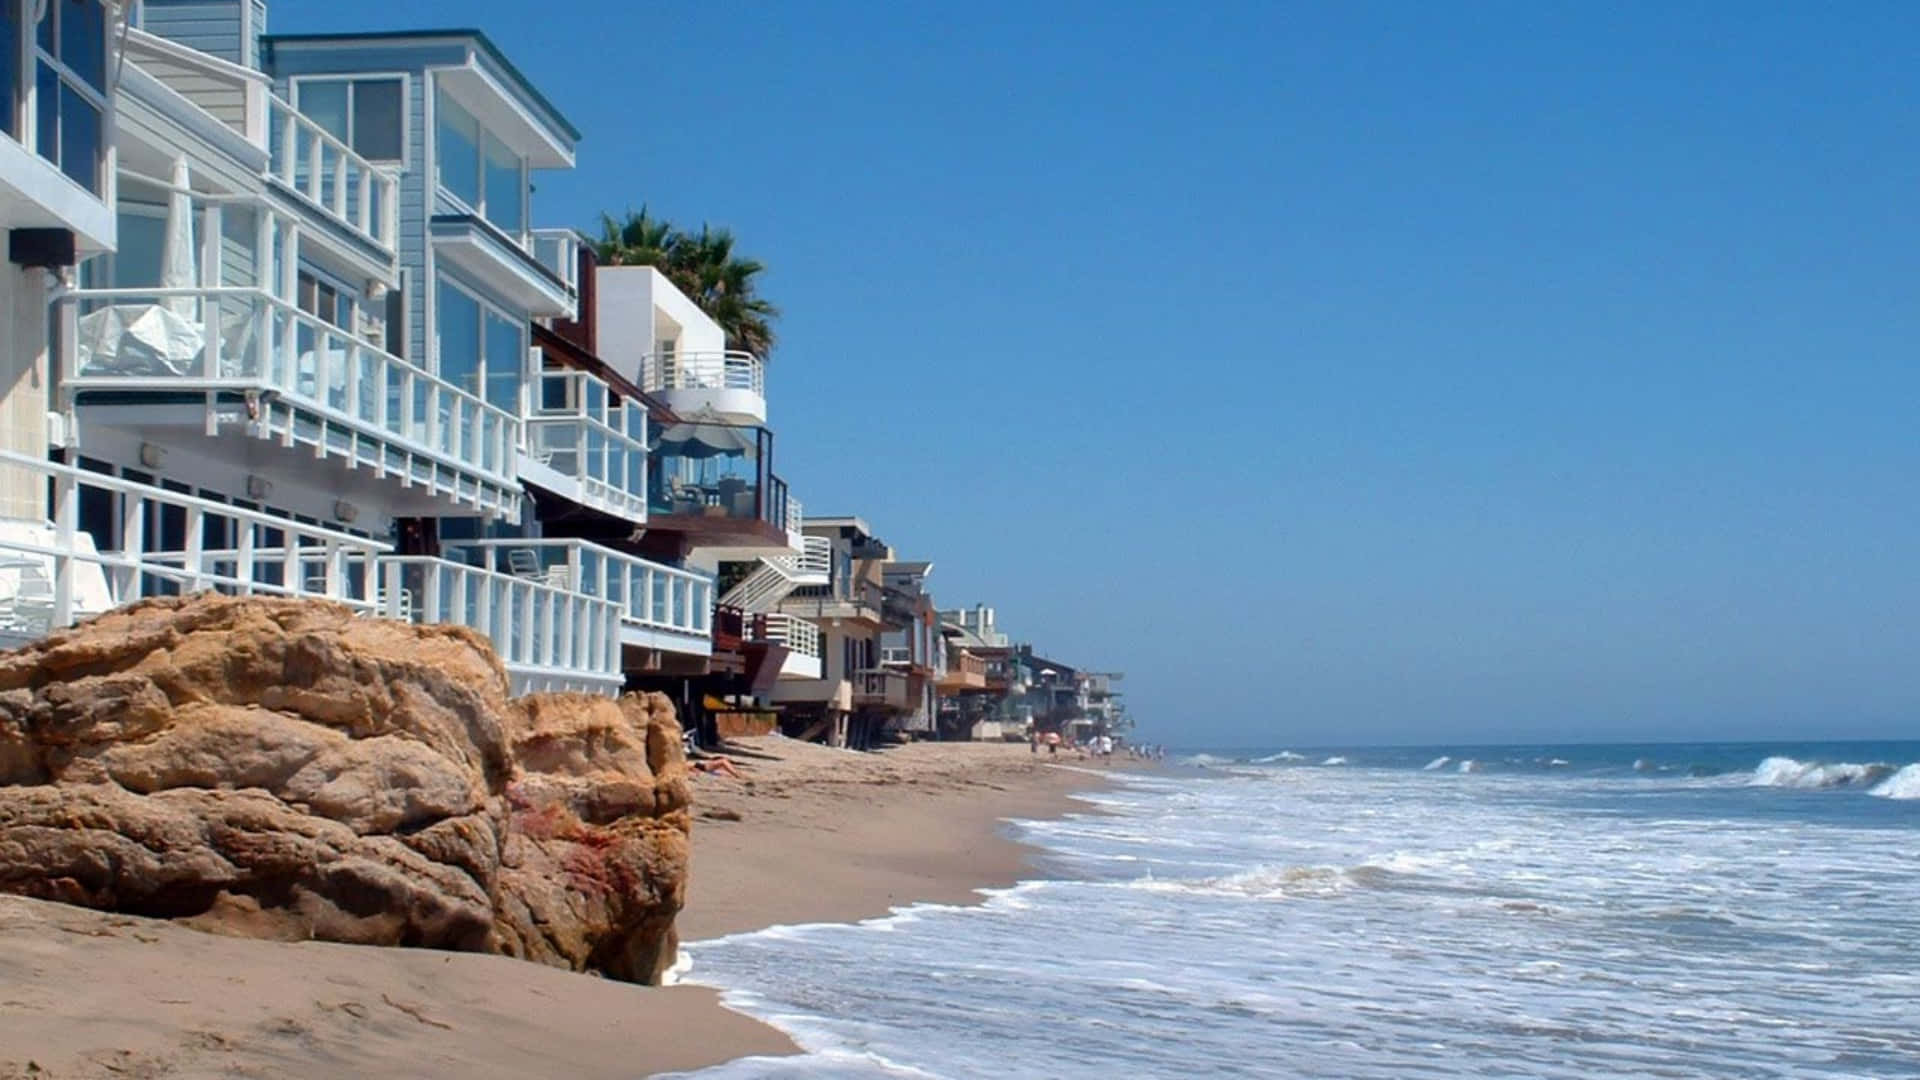 Soak in the beauty of Malibu with an unforgettable beach background